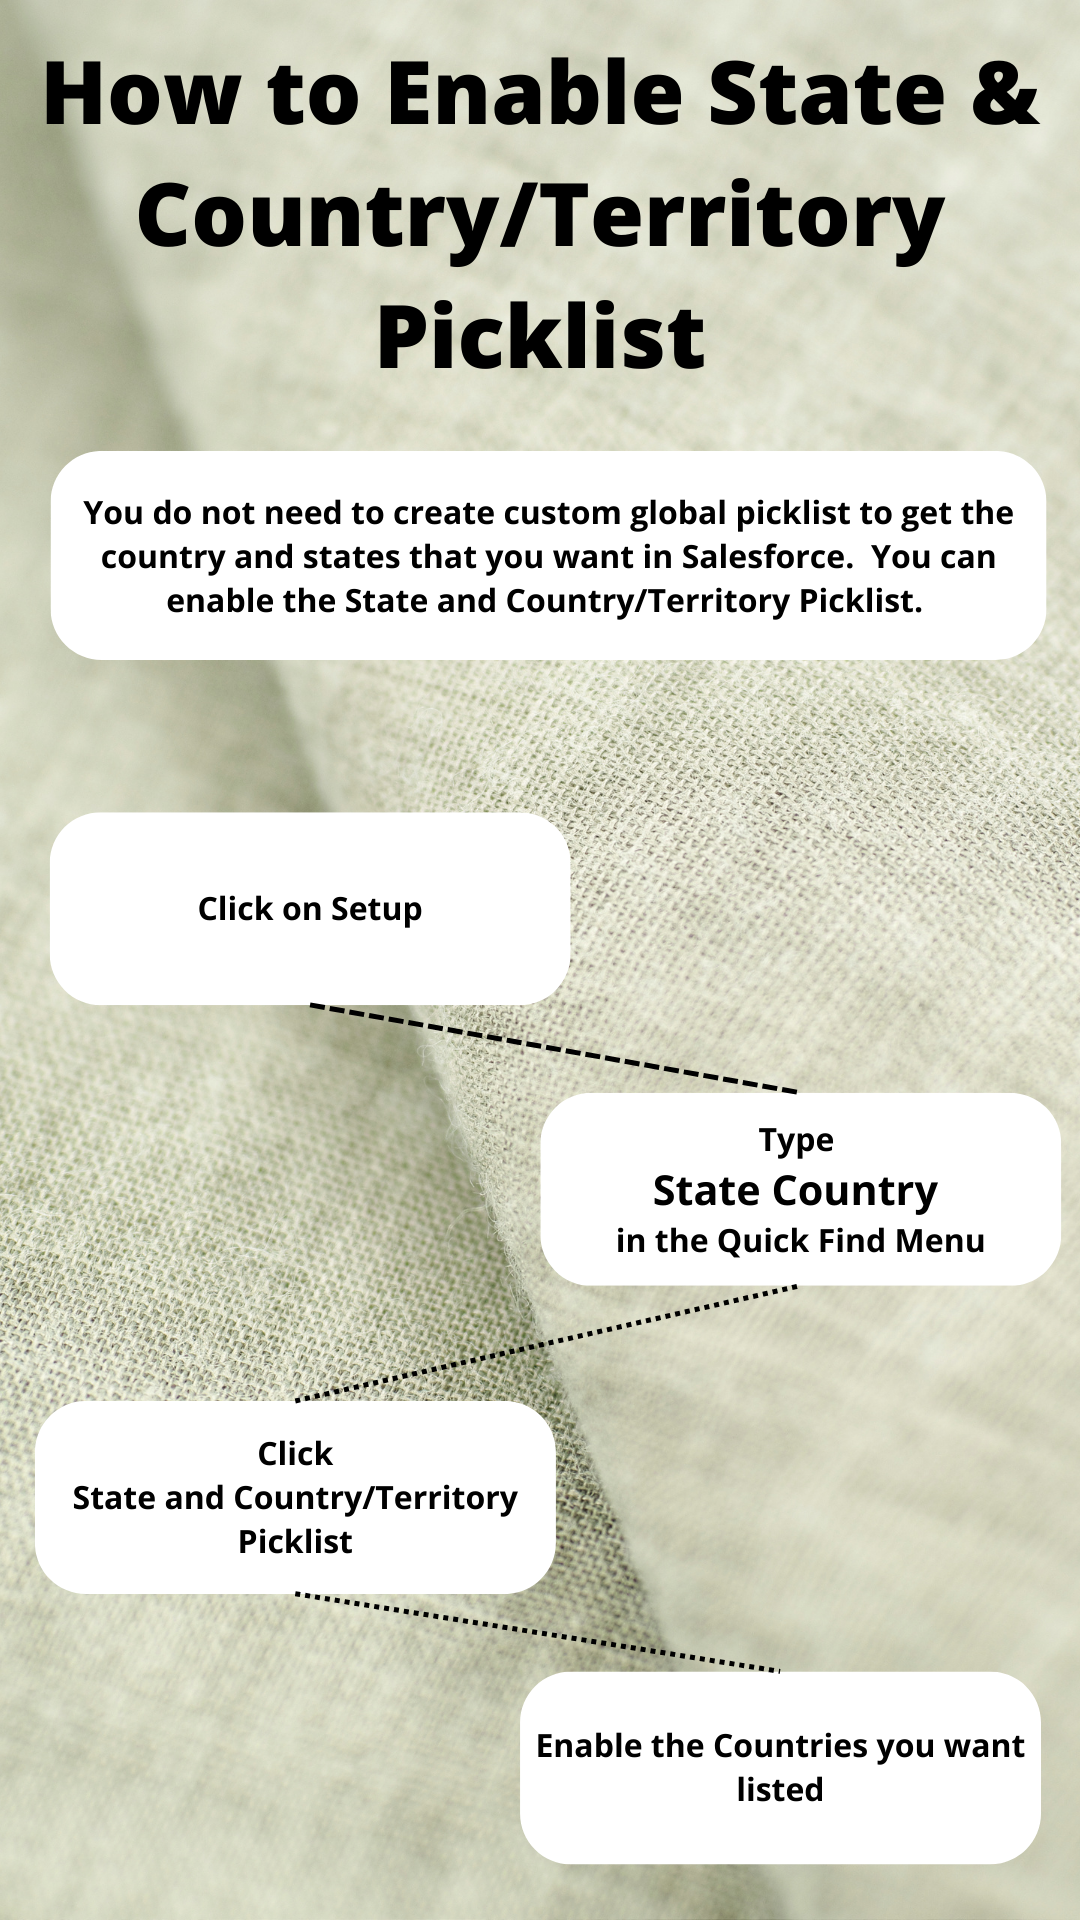 How to Enable State Country and Territory Picklist in Salesforce